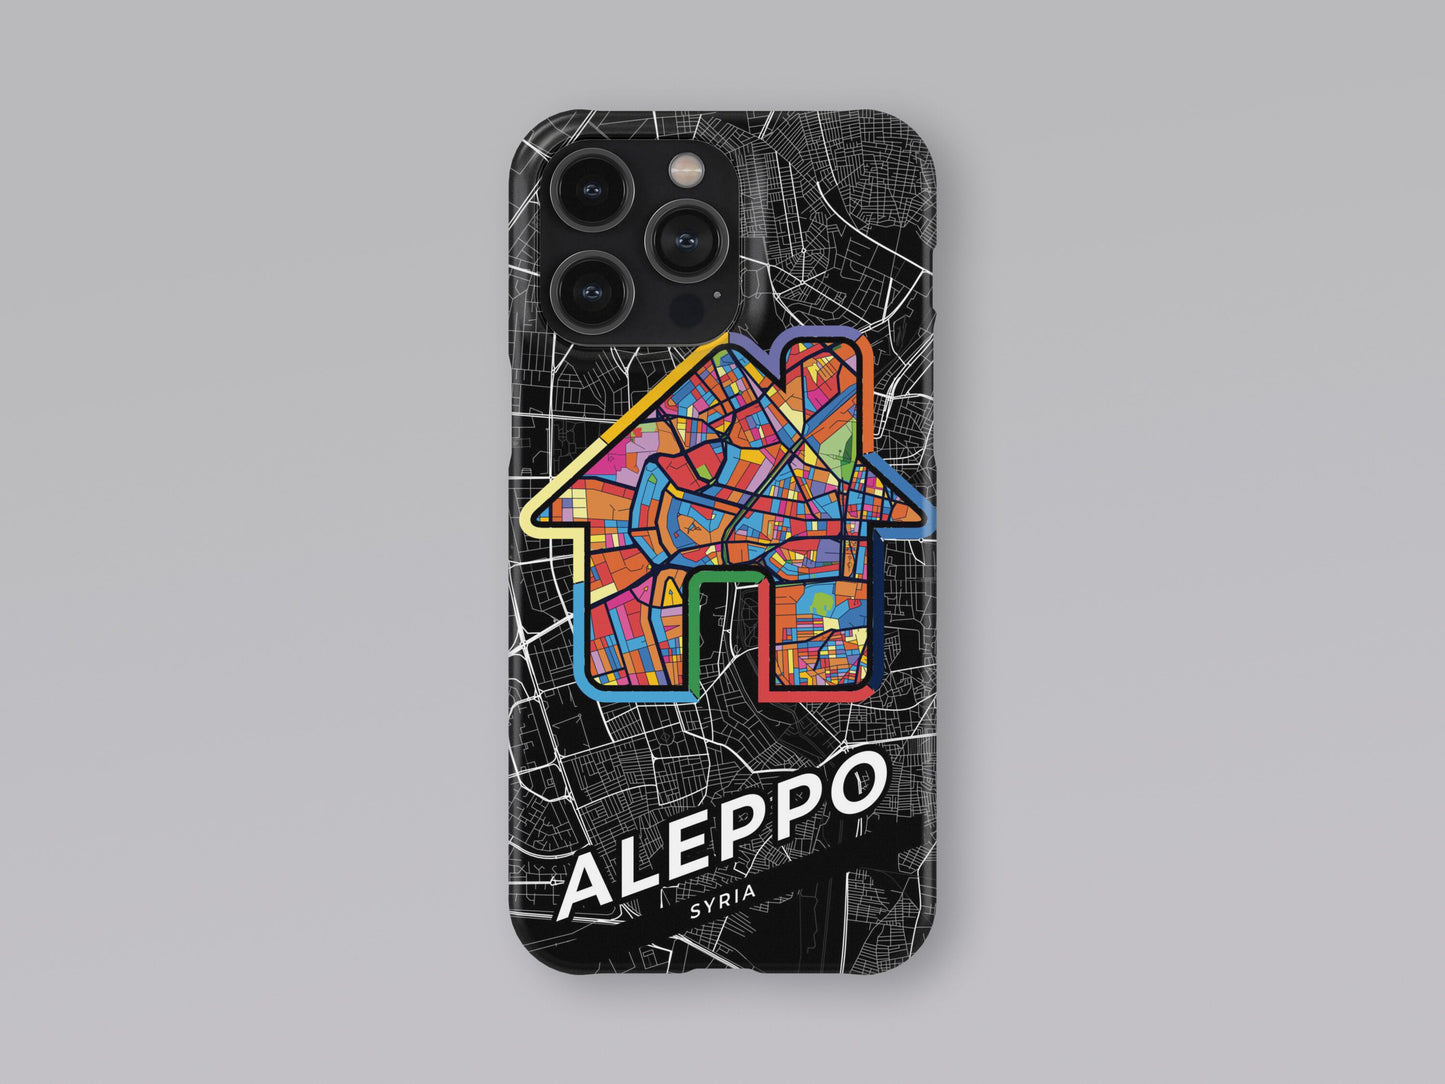 Aleppo Syria slim phone case with colorful icon. Birthday, wedding or housewarming gift. Couple match cases. 3